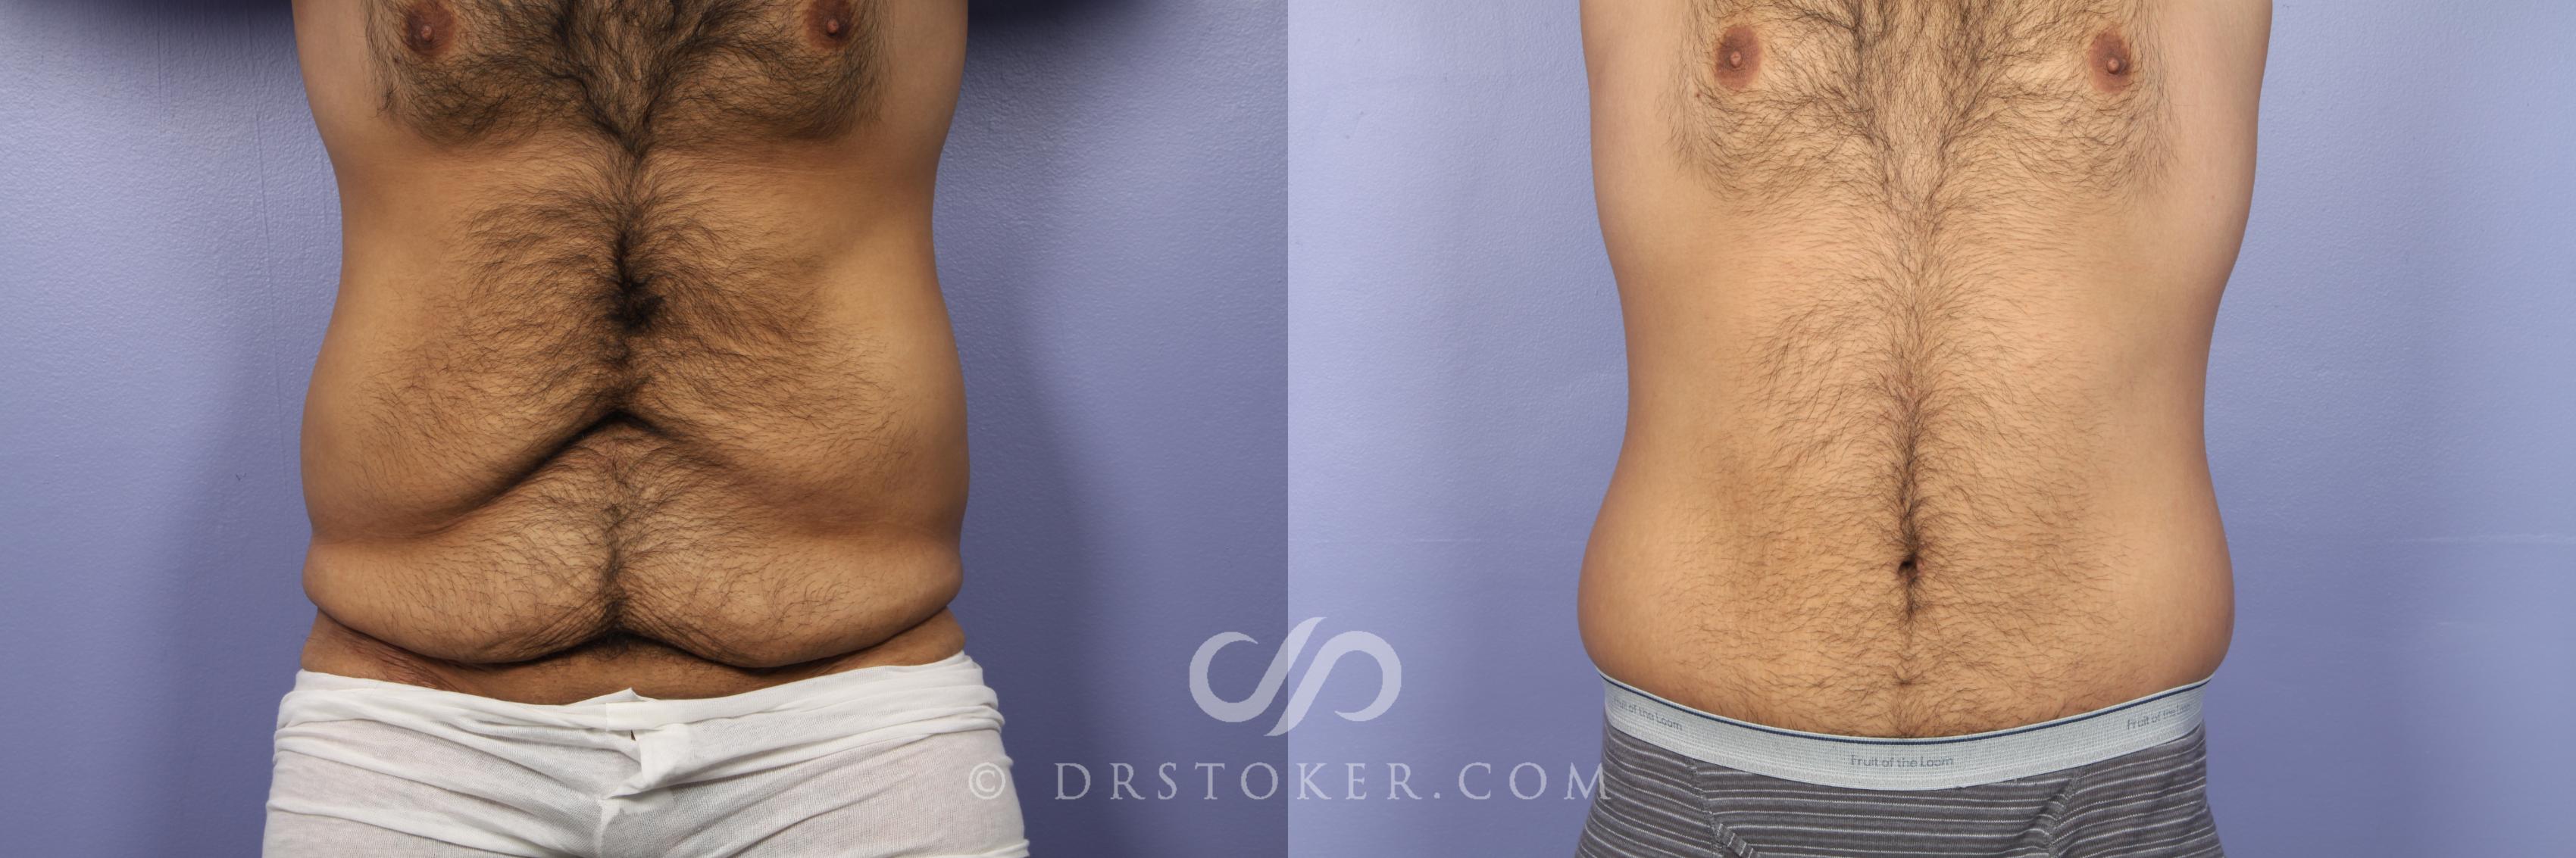 Tummy Tuck for Men Before and After Photo Gallery